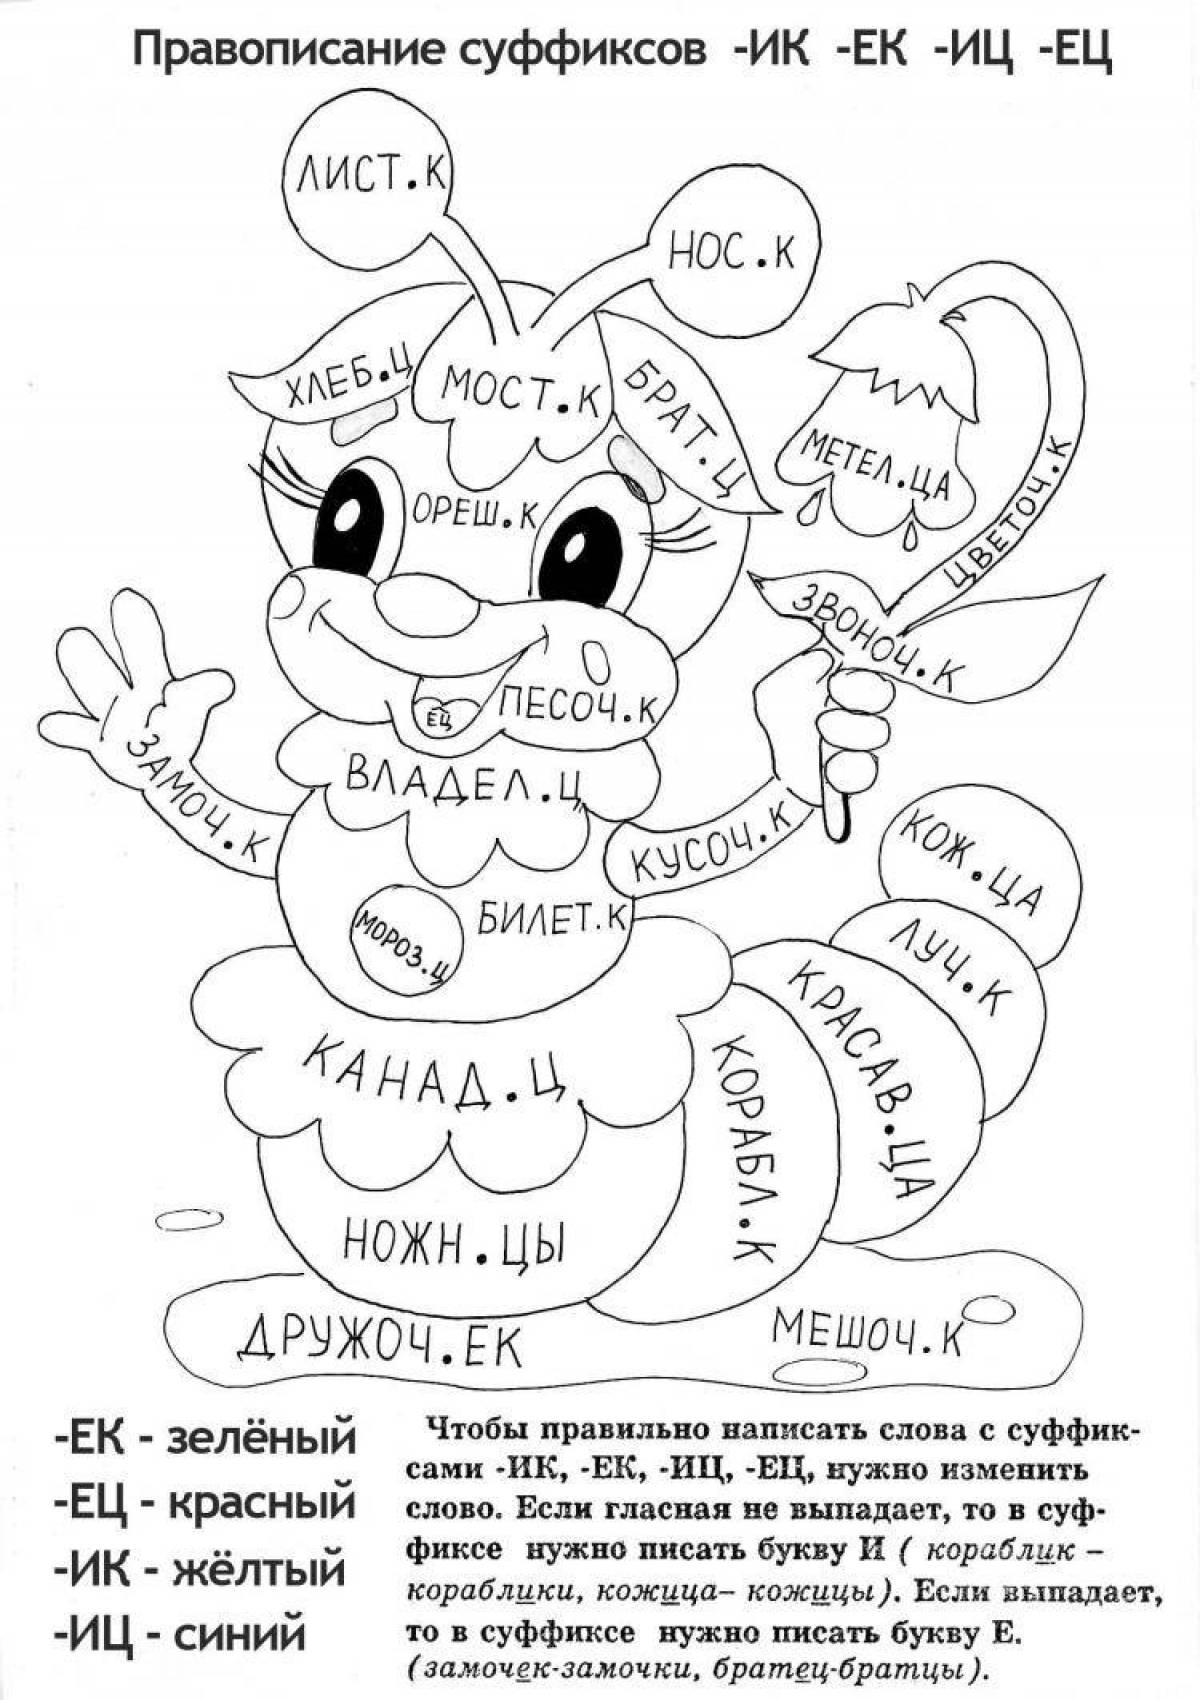 Educational part of speech coloring book